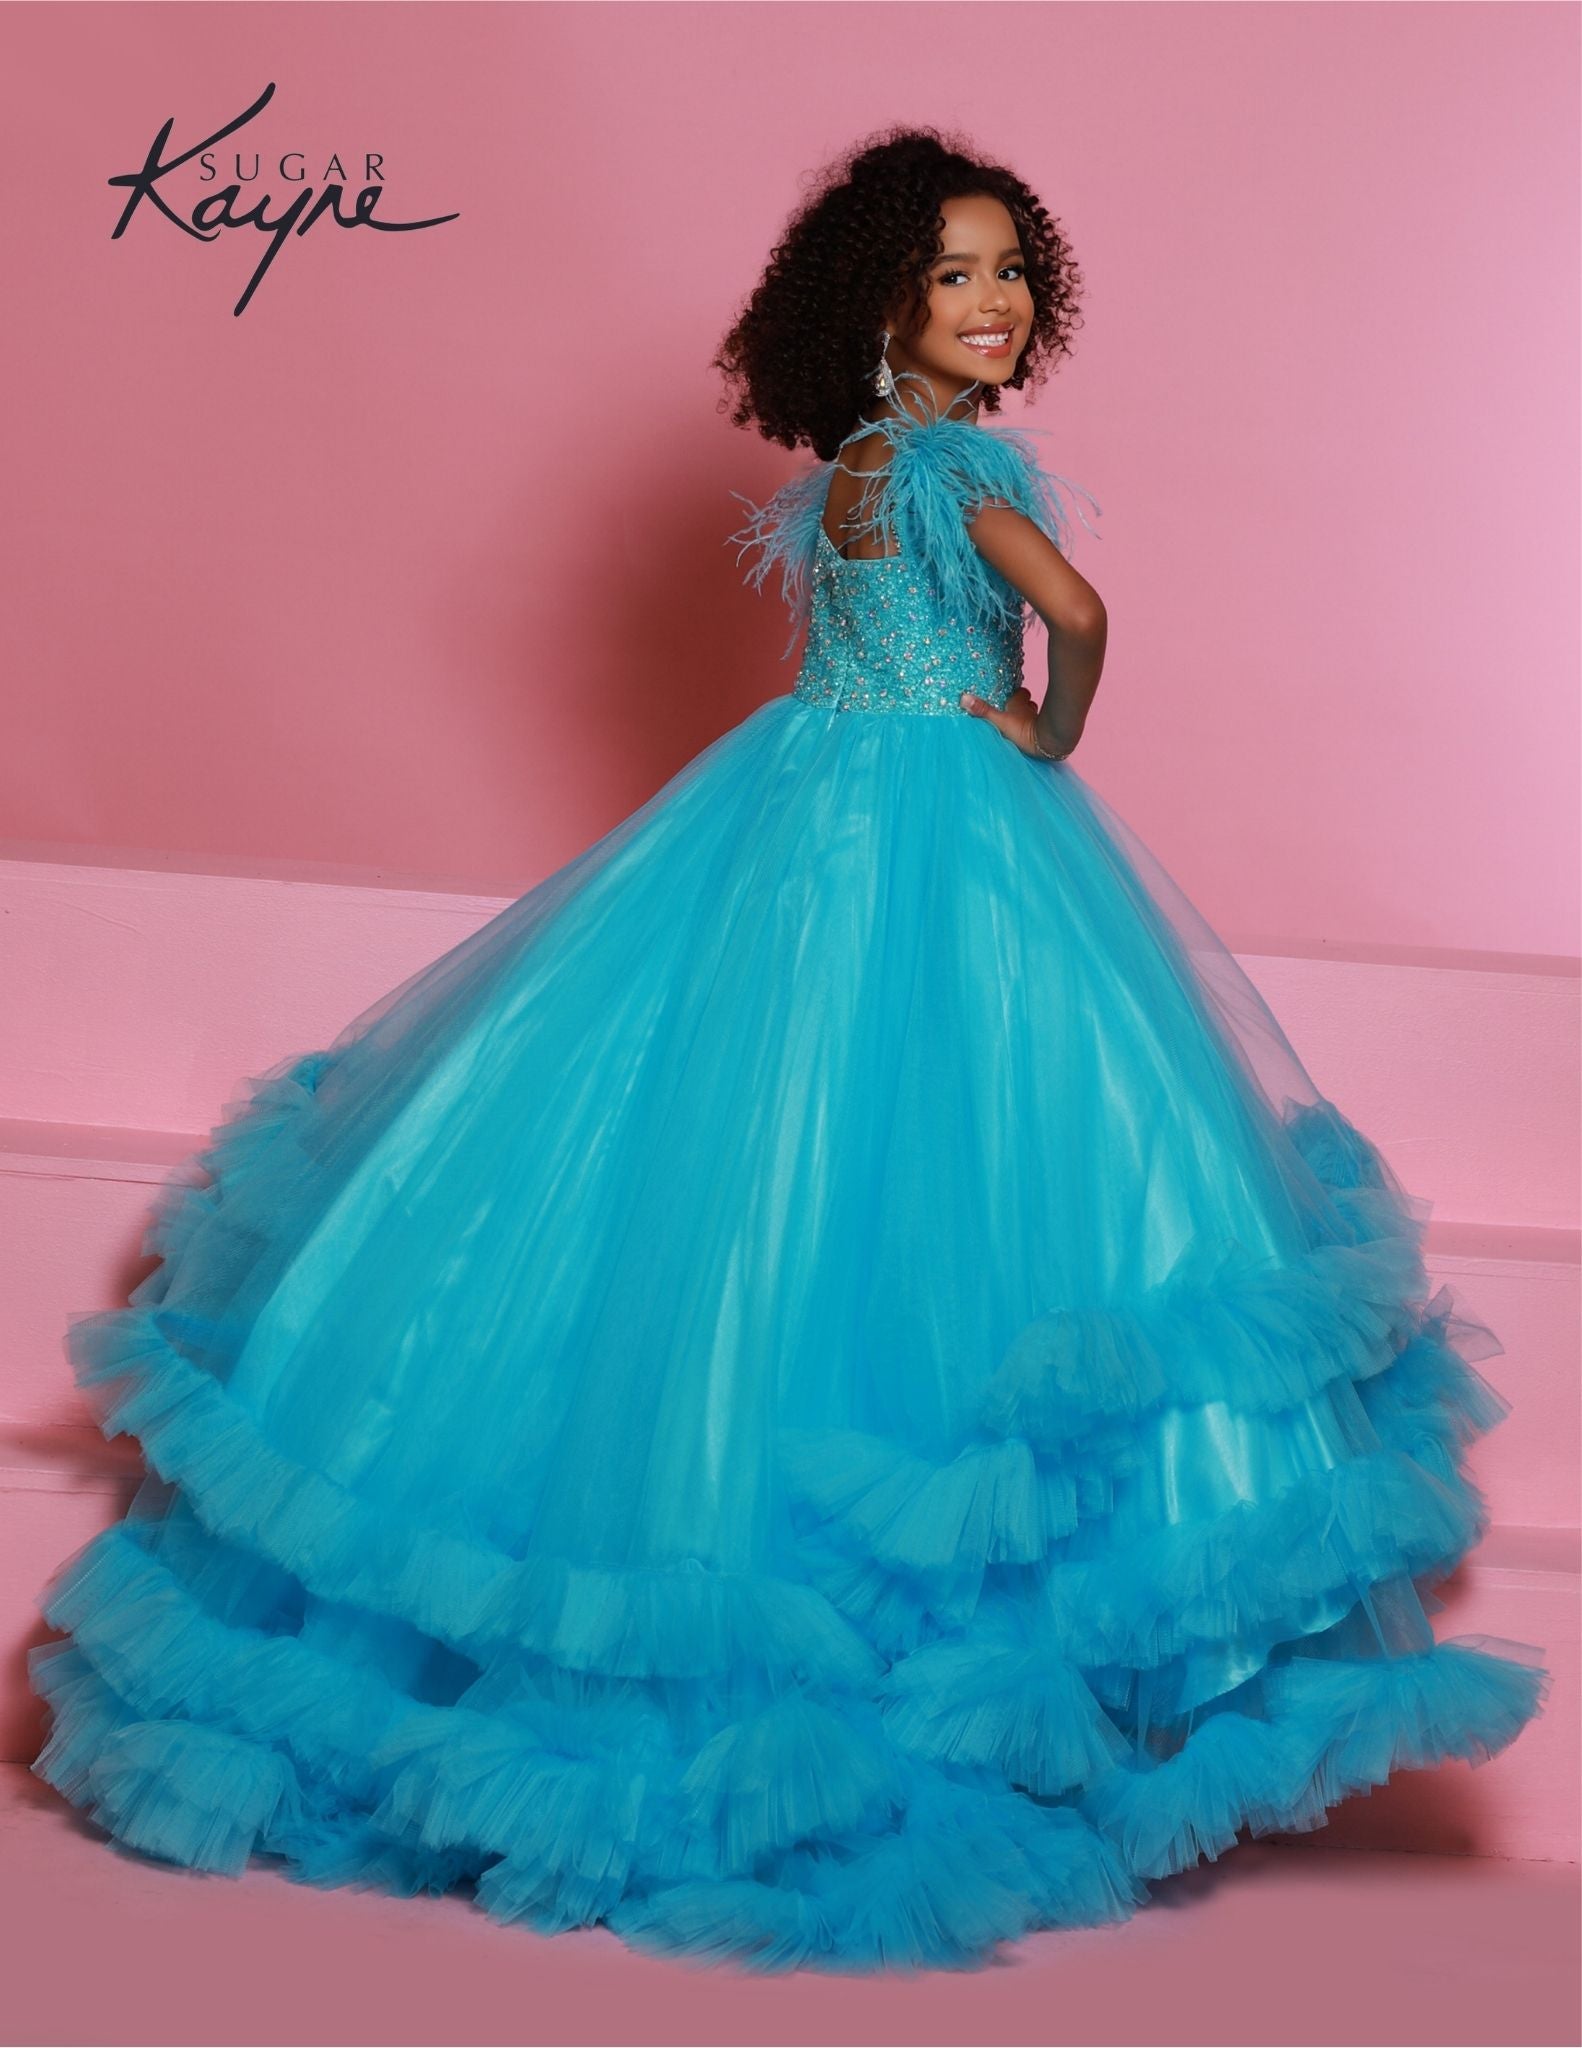 Sugar Kayne C327 features a fashionable aqua pageant dress for girls and preteens, complete with feather straps, a tiered ruffle bottom, and a crystal stone bodice.